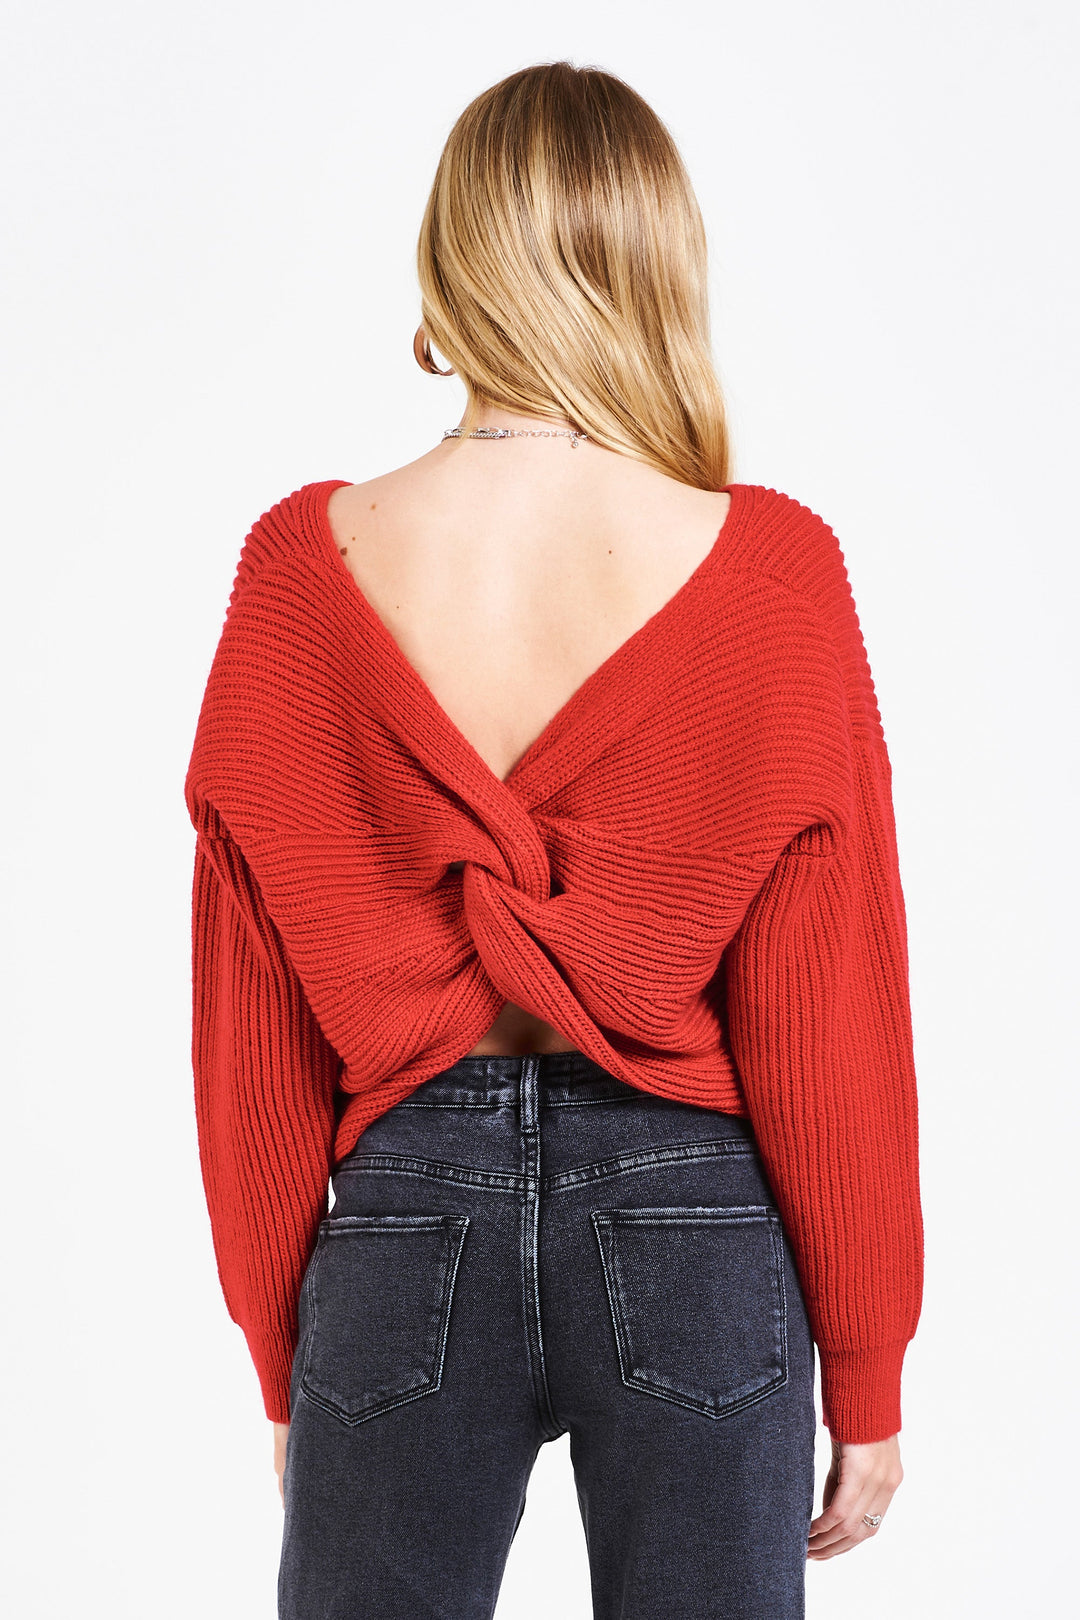 image of a female model wearing a ORION BACK KNOT SWEATER MERRY RED SWEATERS